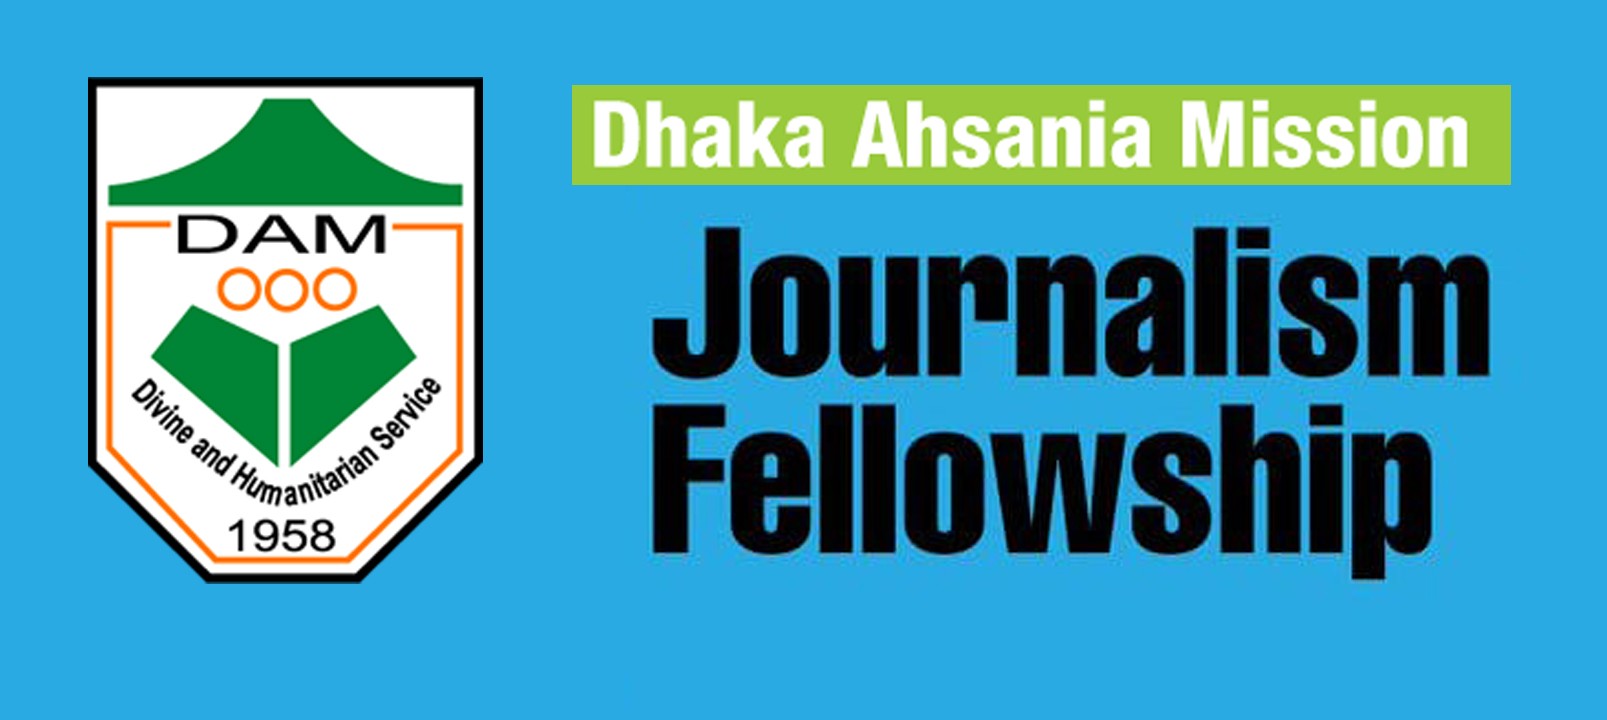 Dhaka Ahsania Mission Declare for Journalists Fellowship on Tobacco Control Issue